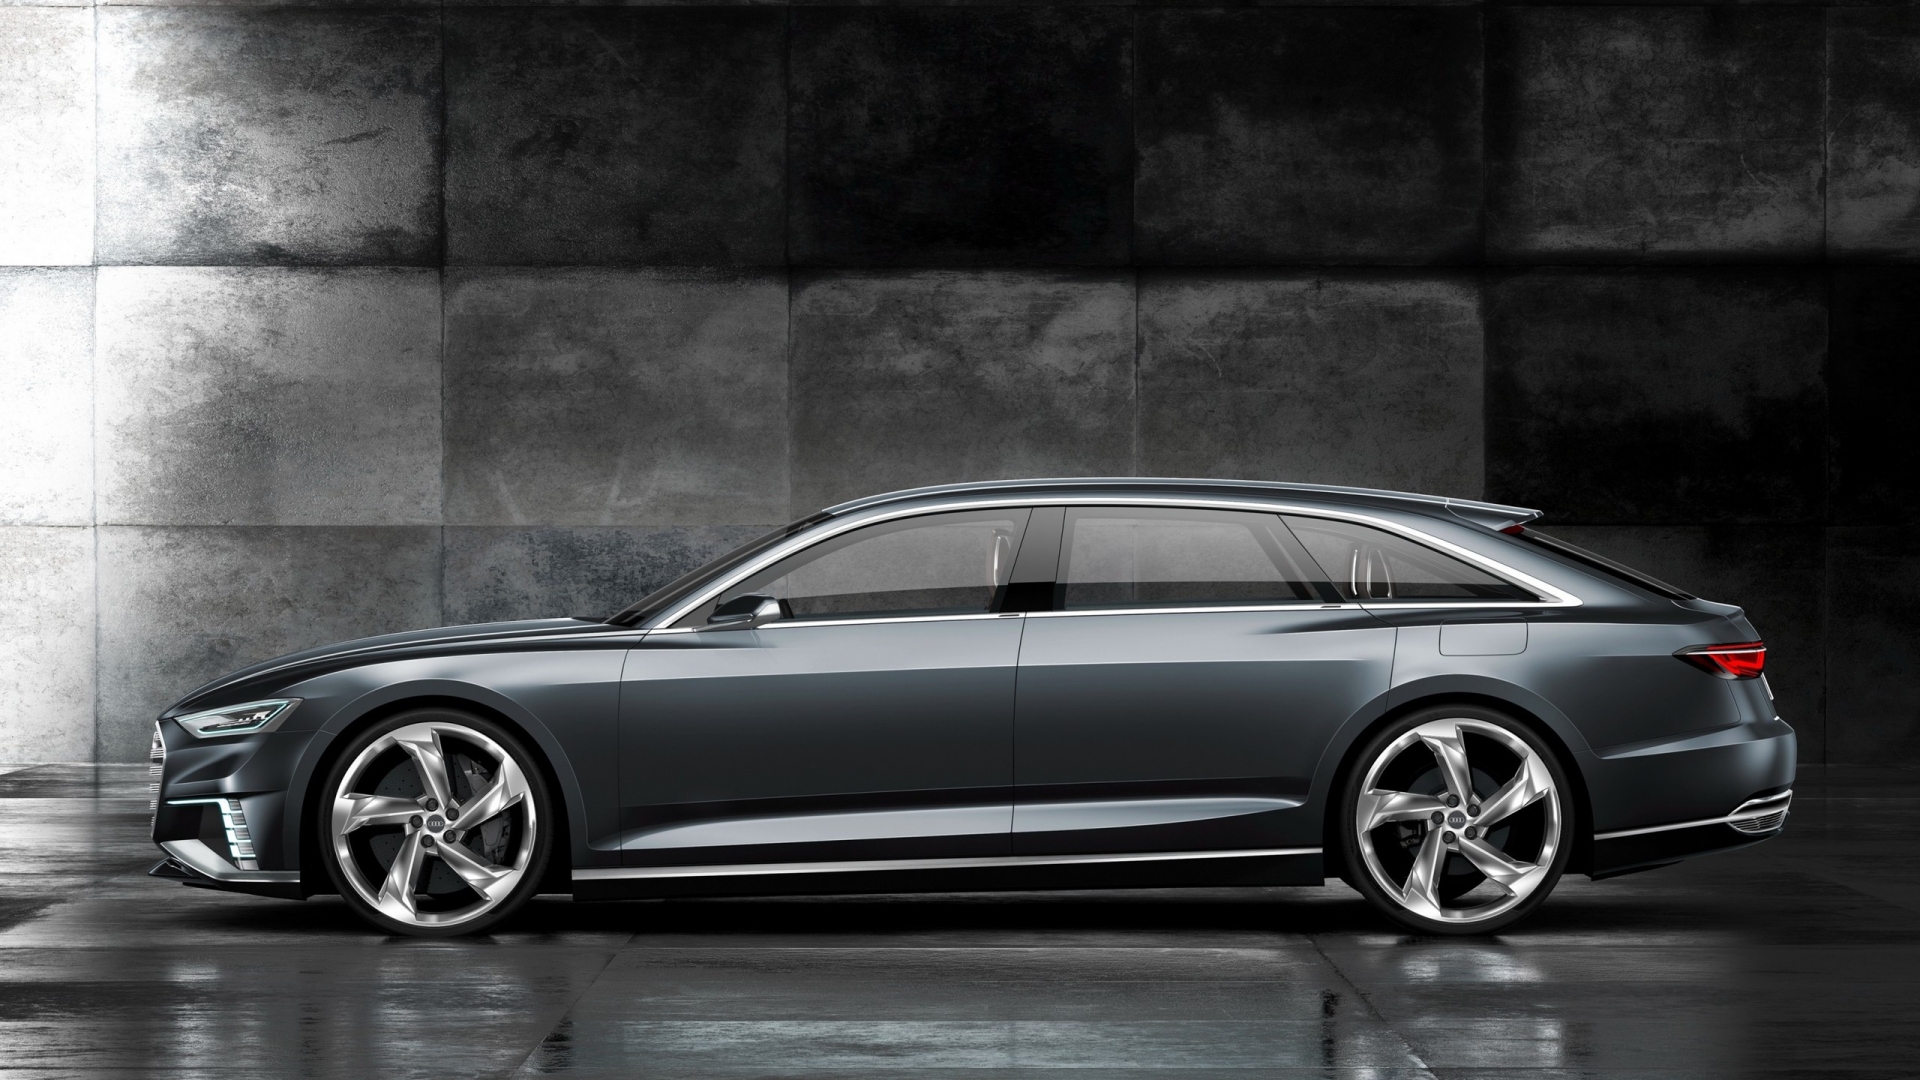 Audi Prologue Side View for 1920 x 1080 HDTV 1080p resolution